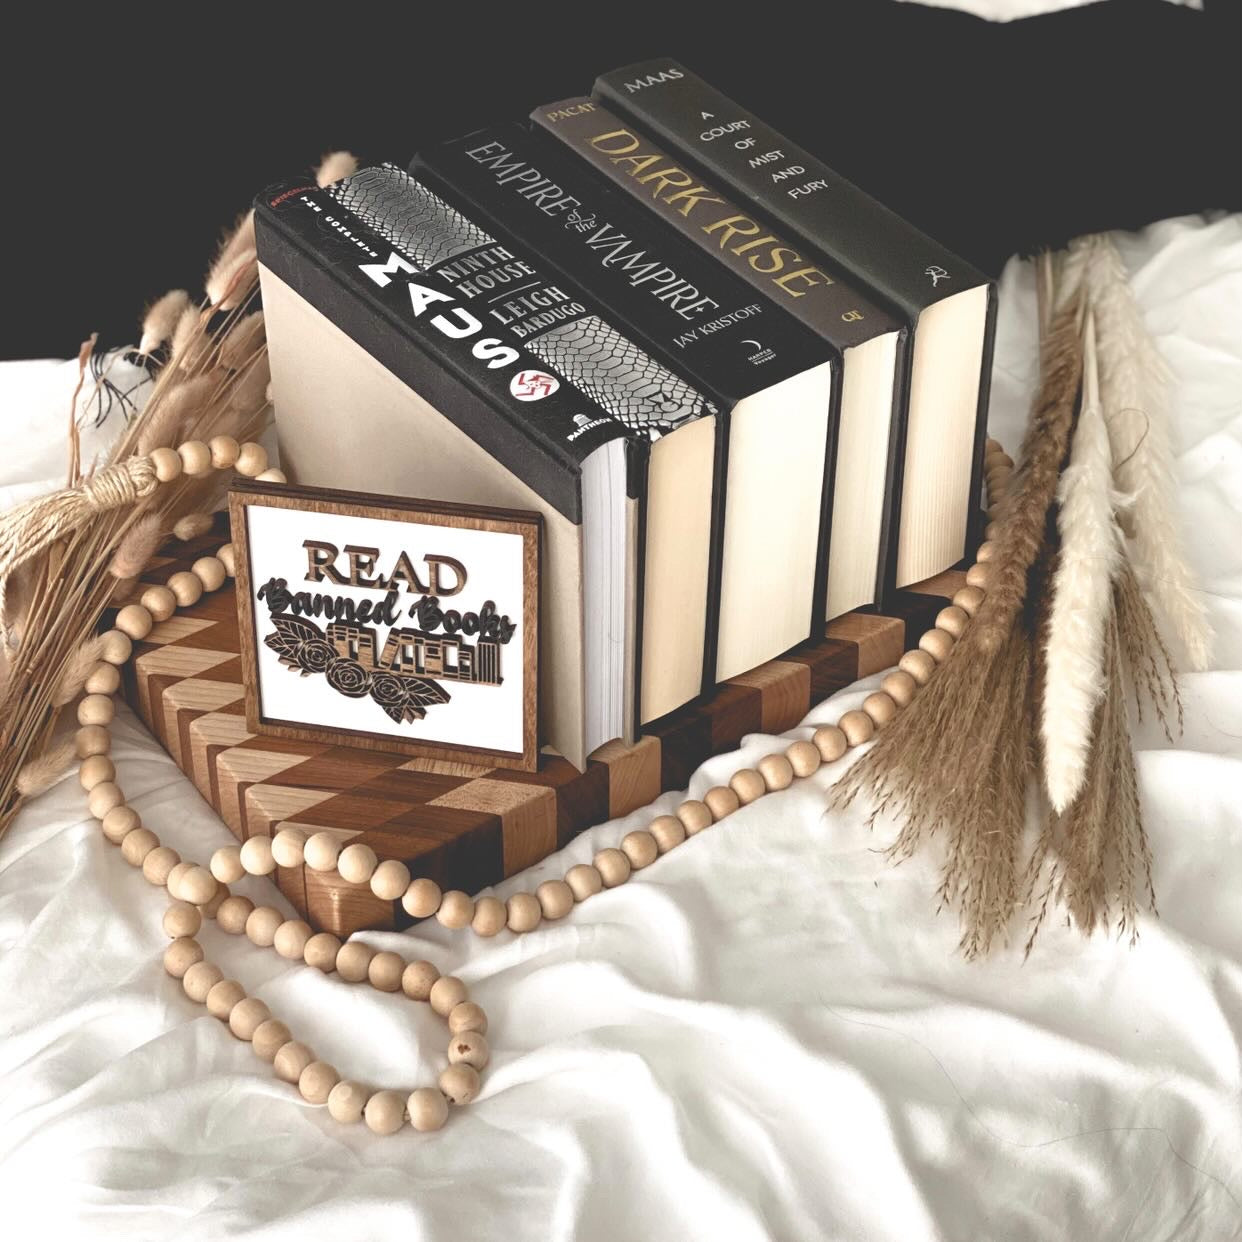 Read Banned Books Sign - firedrakeartistry Photo credit @the.polished.diamond